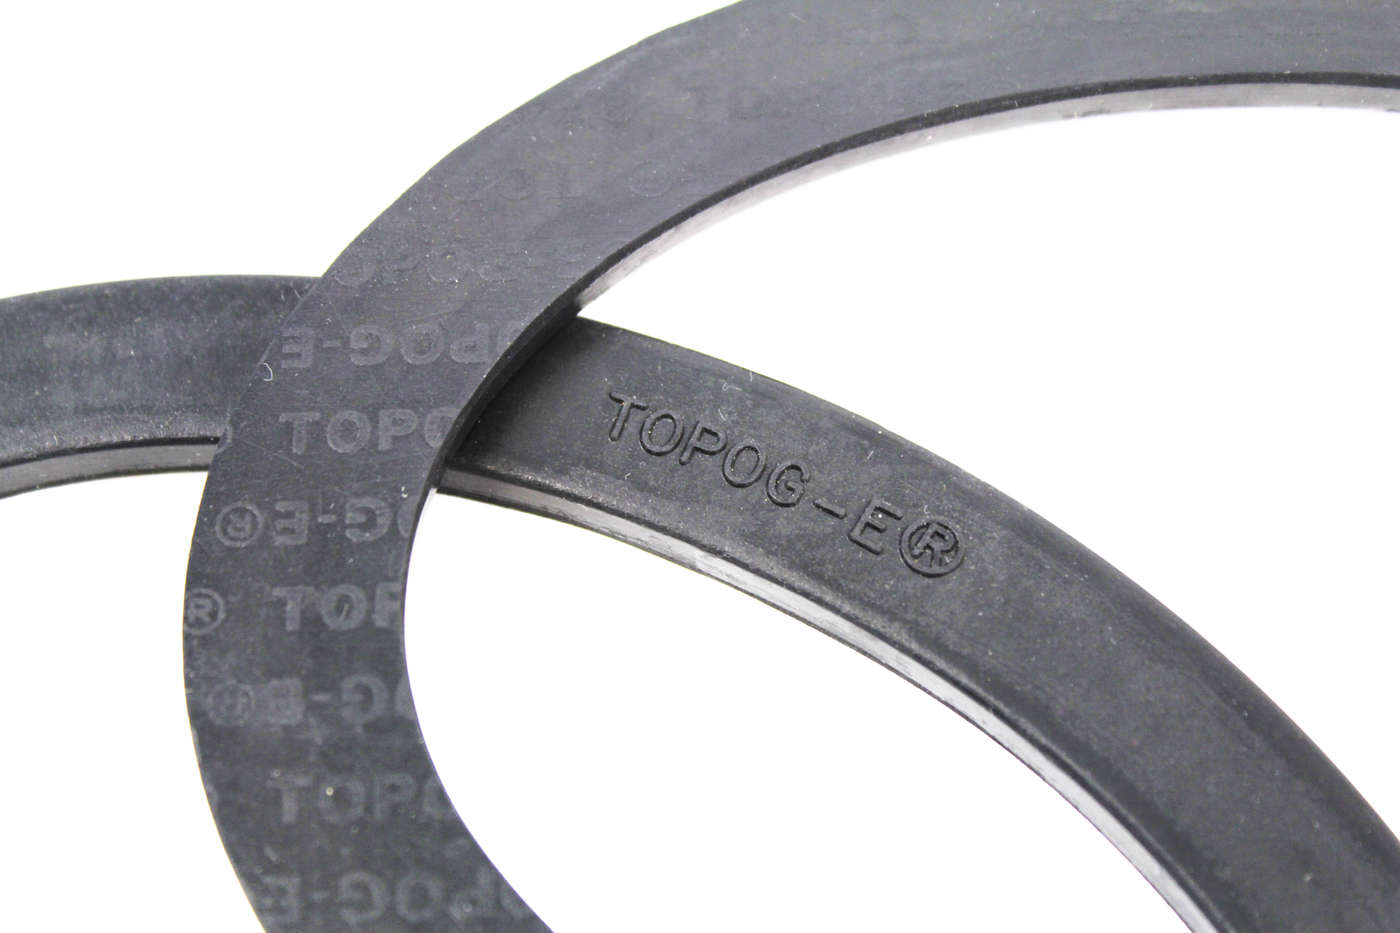 Topog-E ® Series moulded rubber gaskets